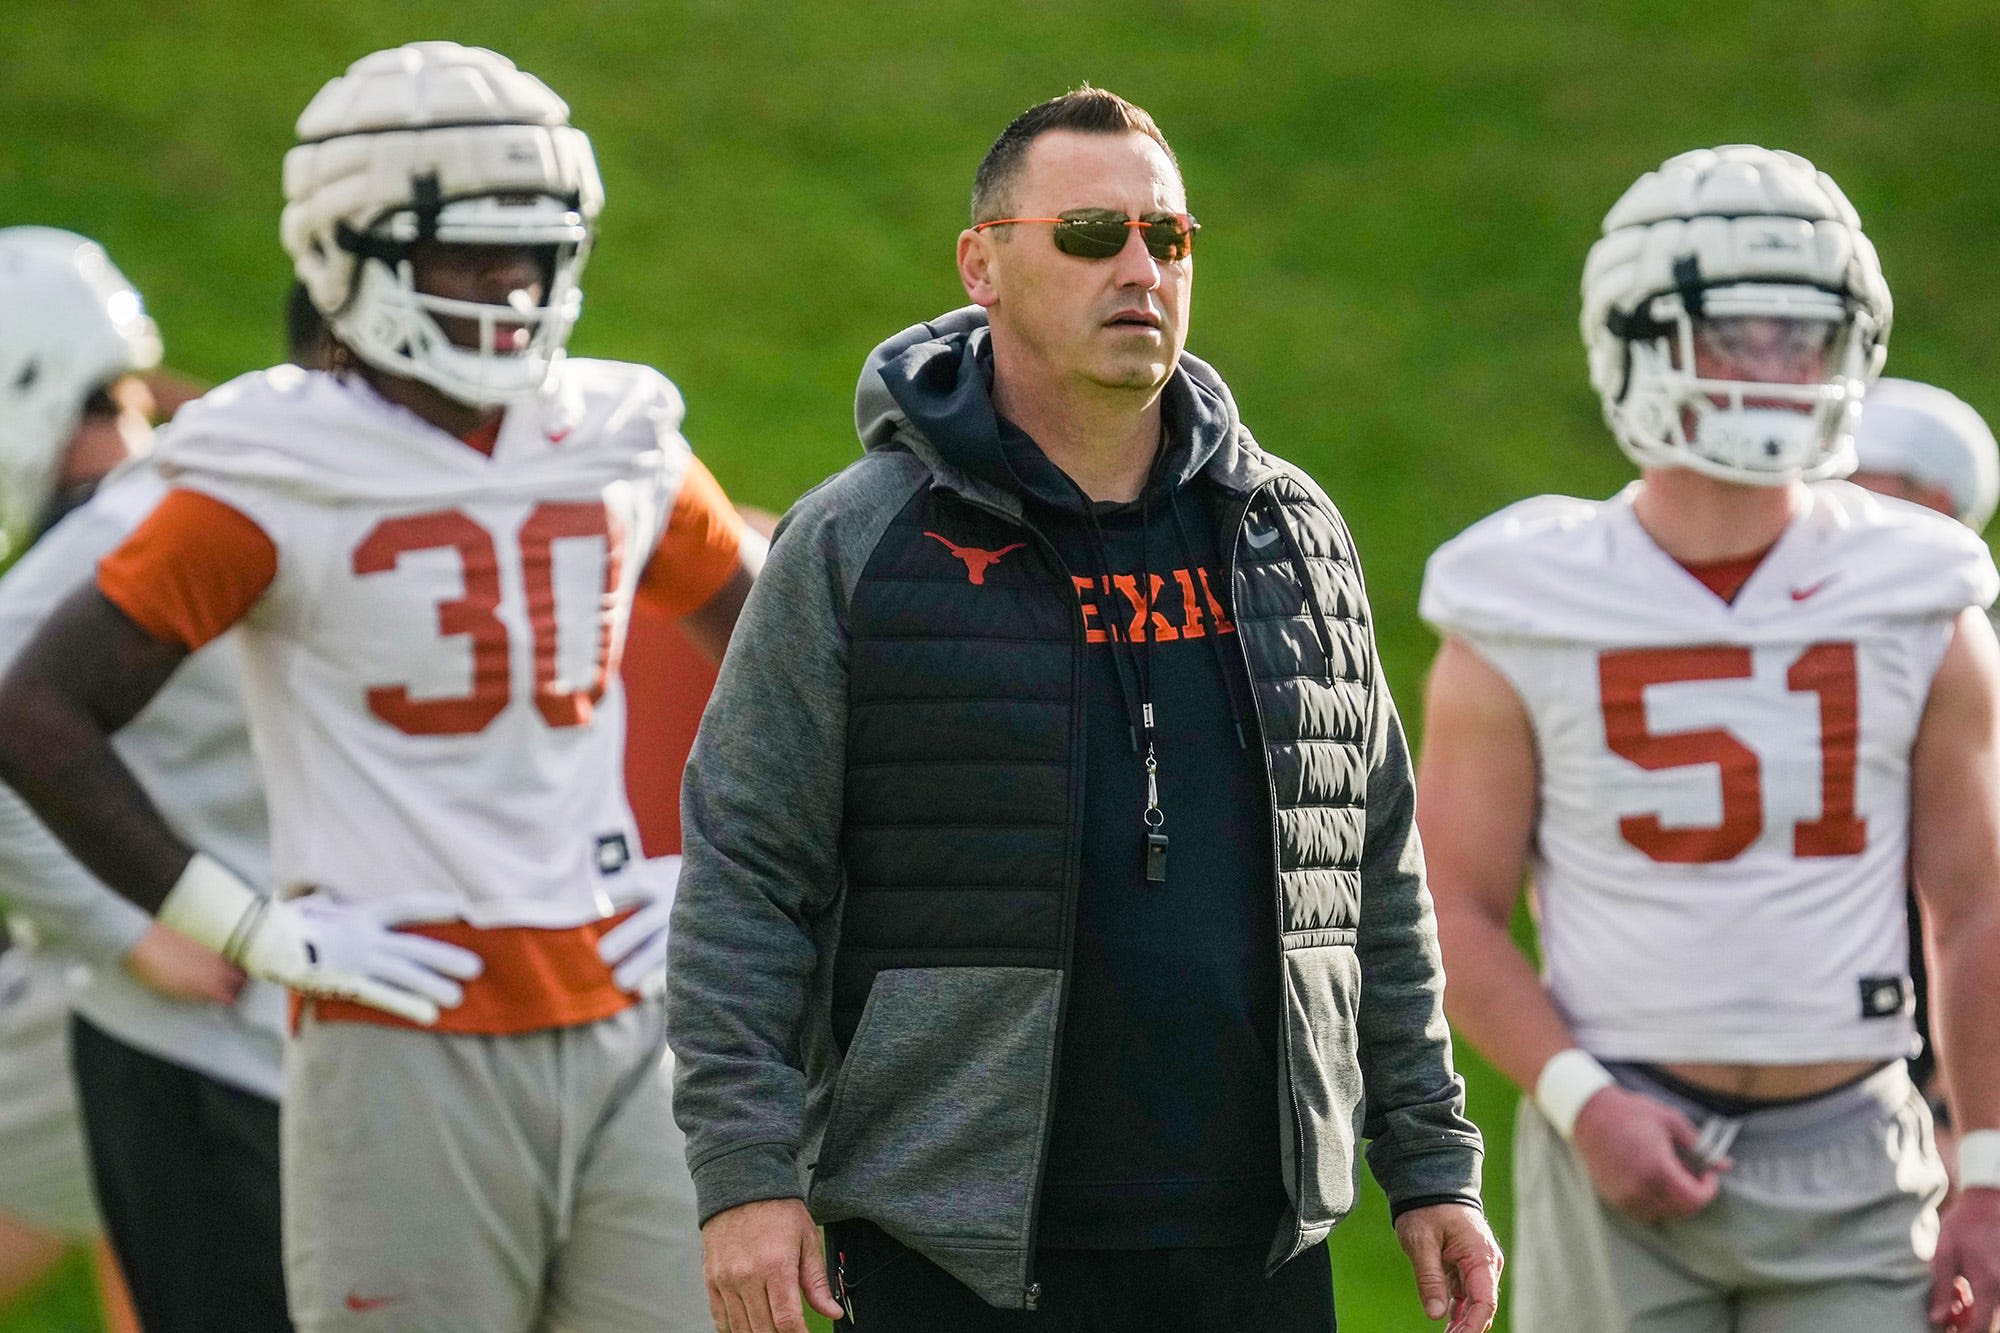 Texas named among top five in latest post-spring power rankings